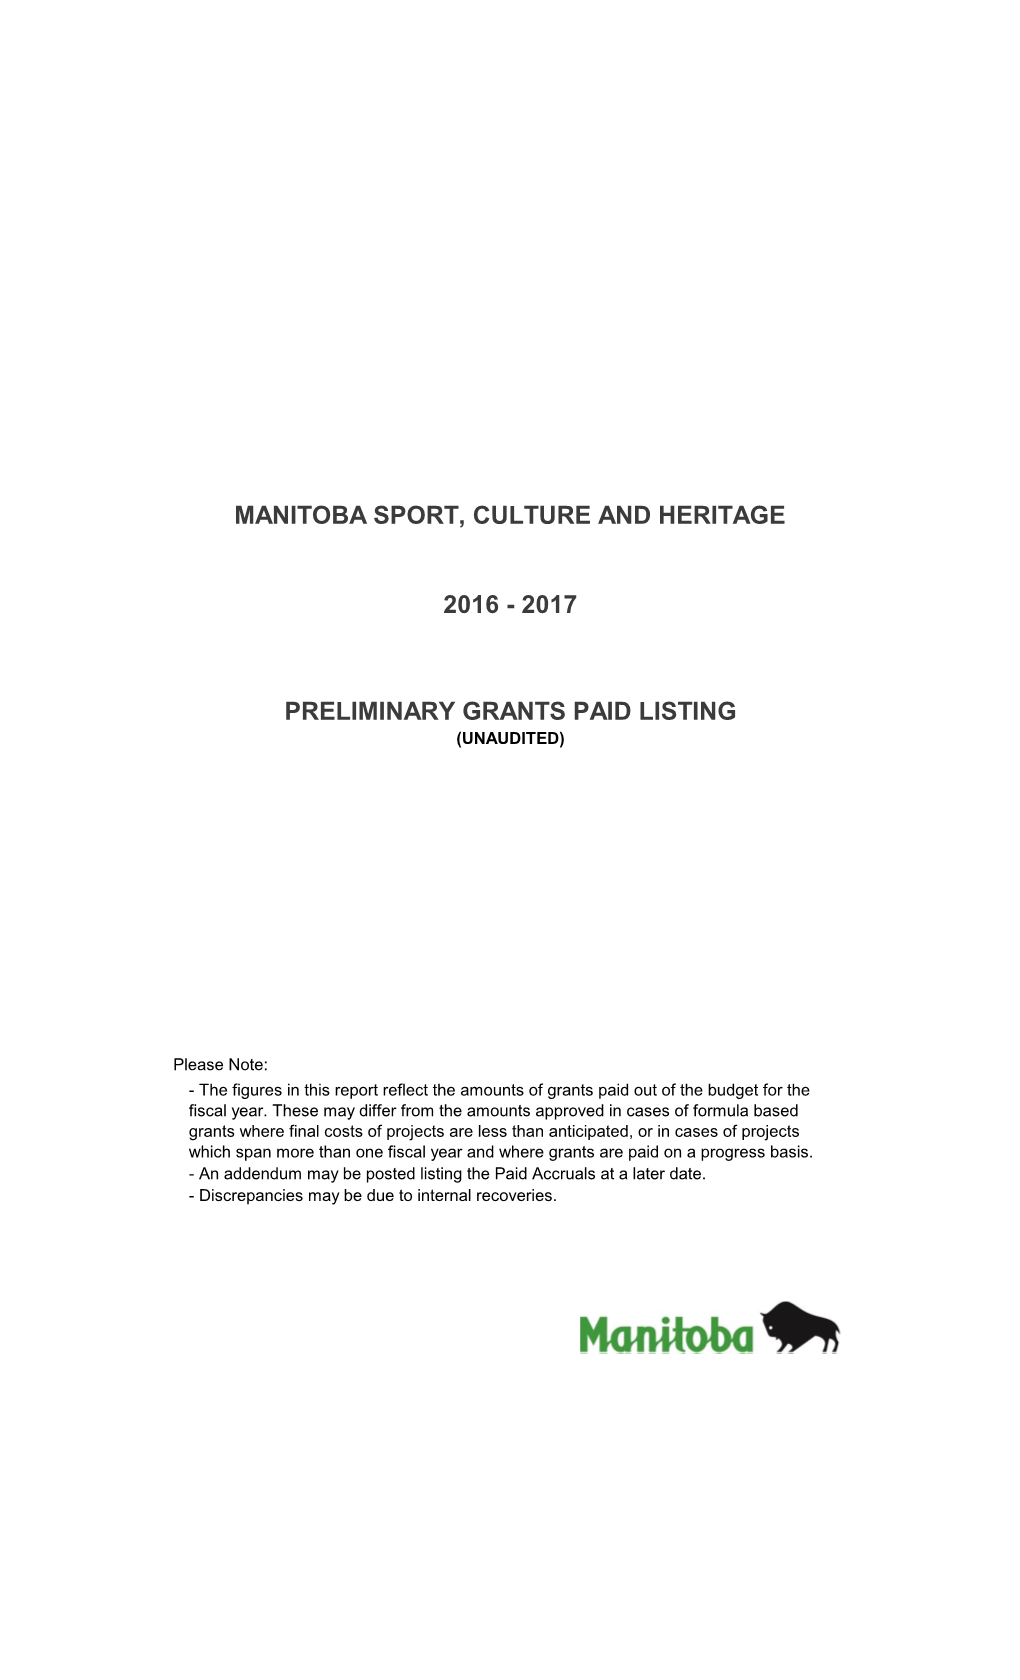 Manitoba Sport, Culture and Heritage 2016 - 2017 Preliminary Grants Paid Listing